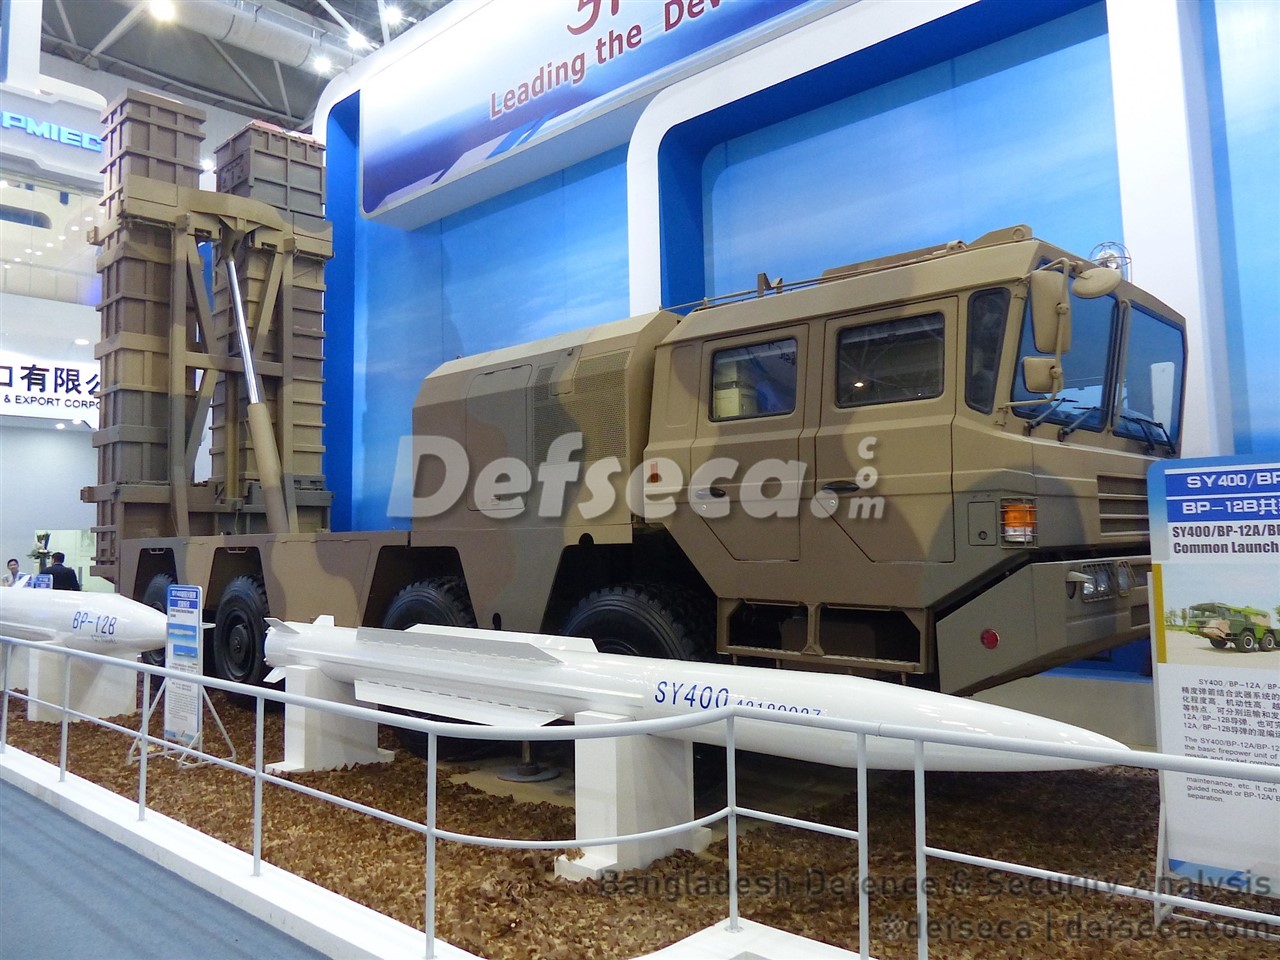 Tip-off on Myanmar Army’s SY-400 GMLRS acquisition